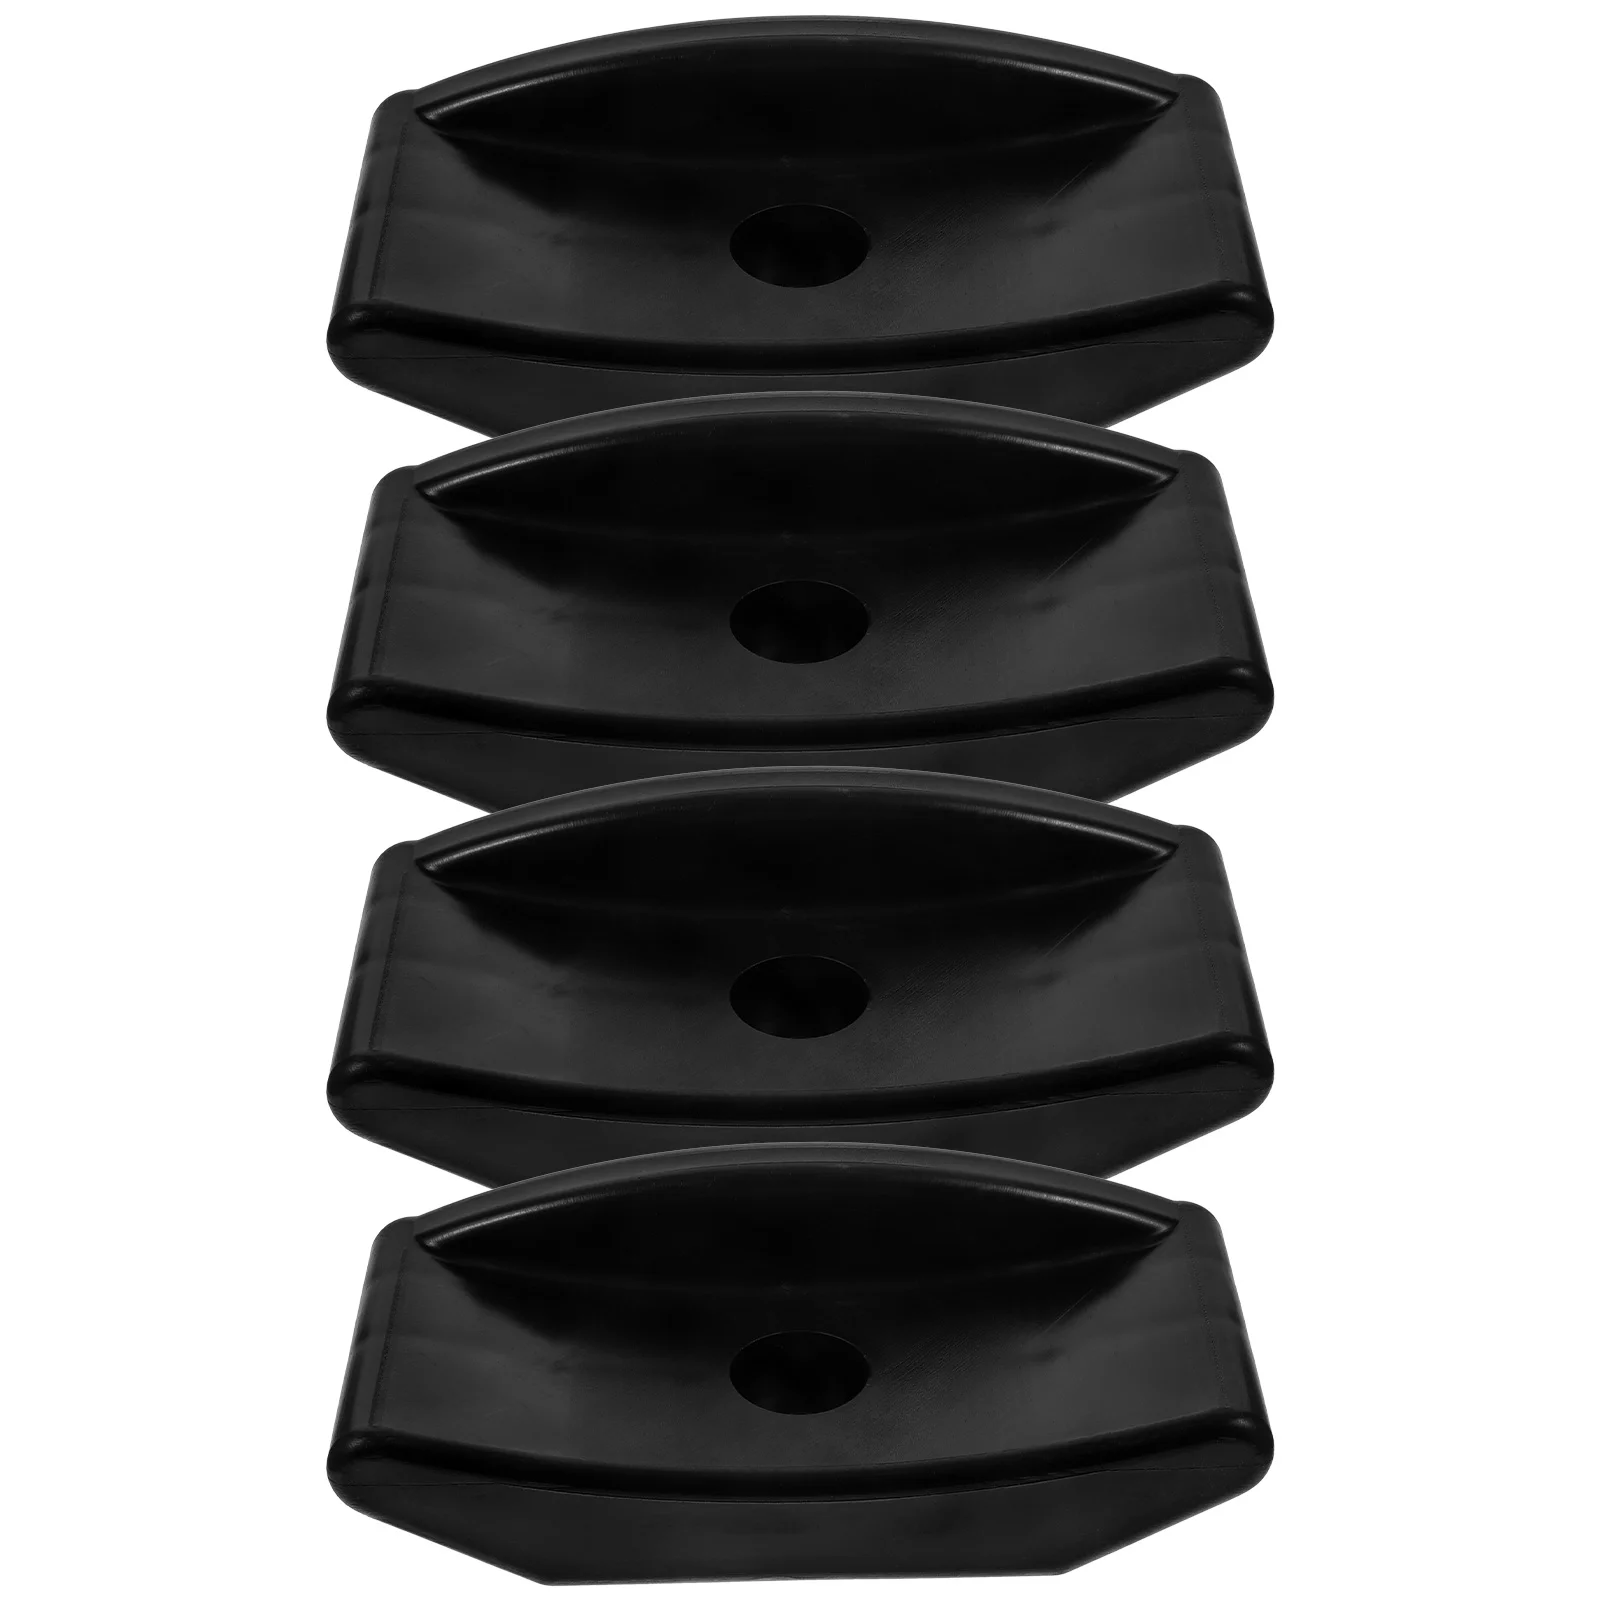 

4 Pcs Dumbbell Rest Workout Tool Gym Accessory Storage Rack Household Fitness Stand Pp Wear-resistant Plastic Shelves